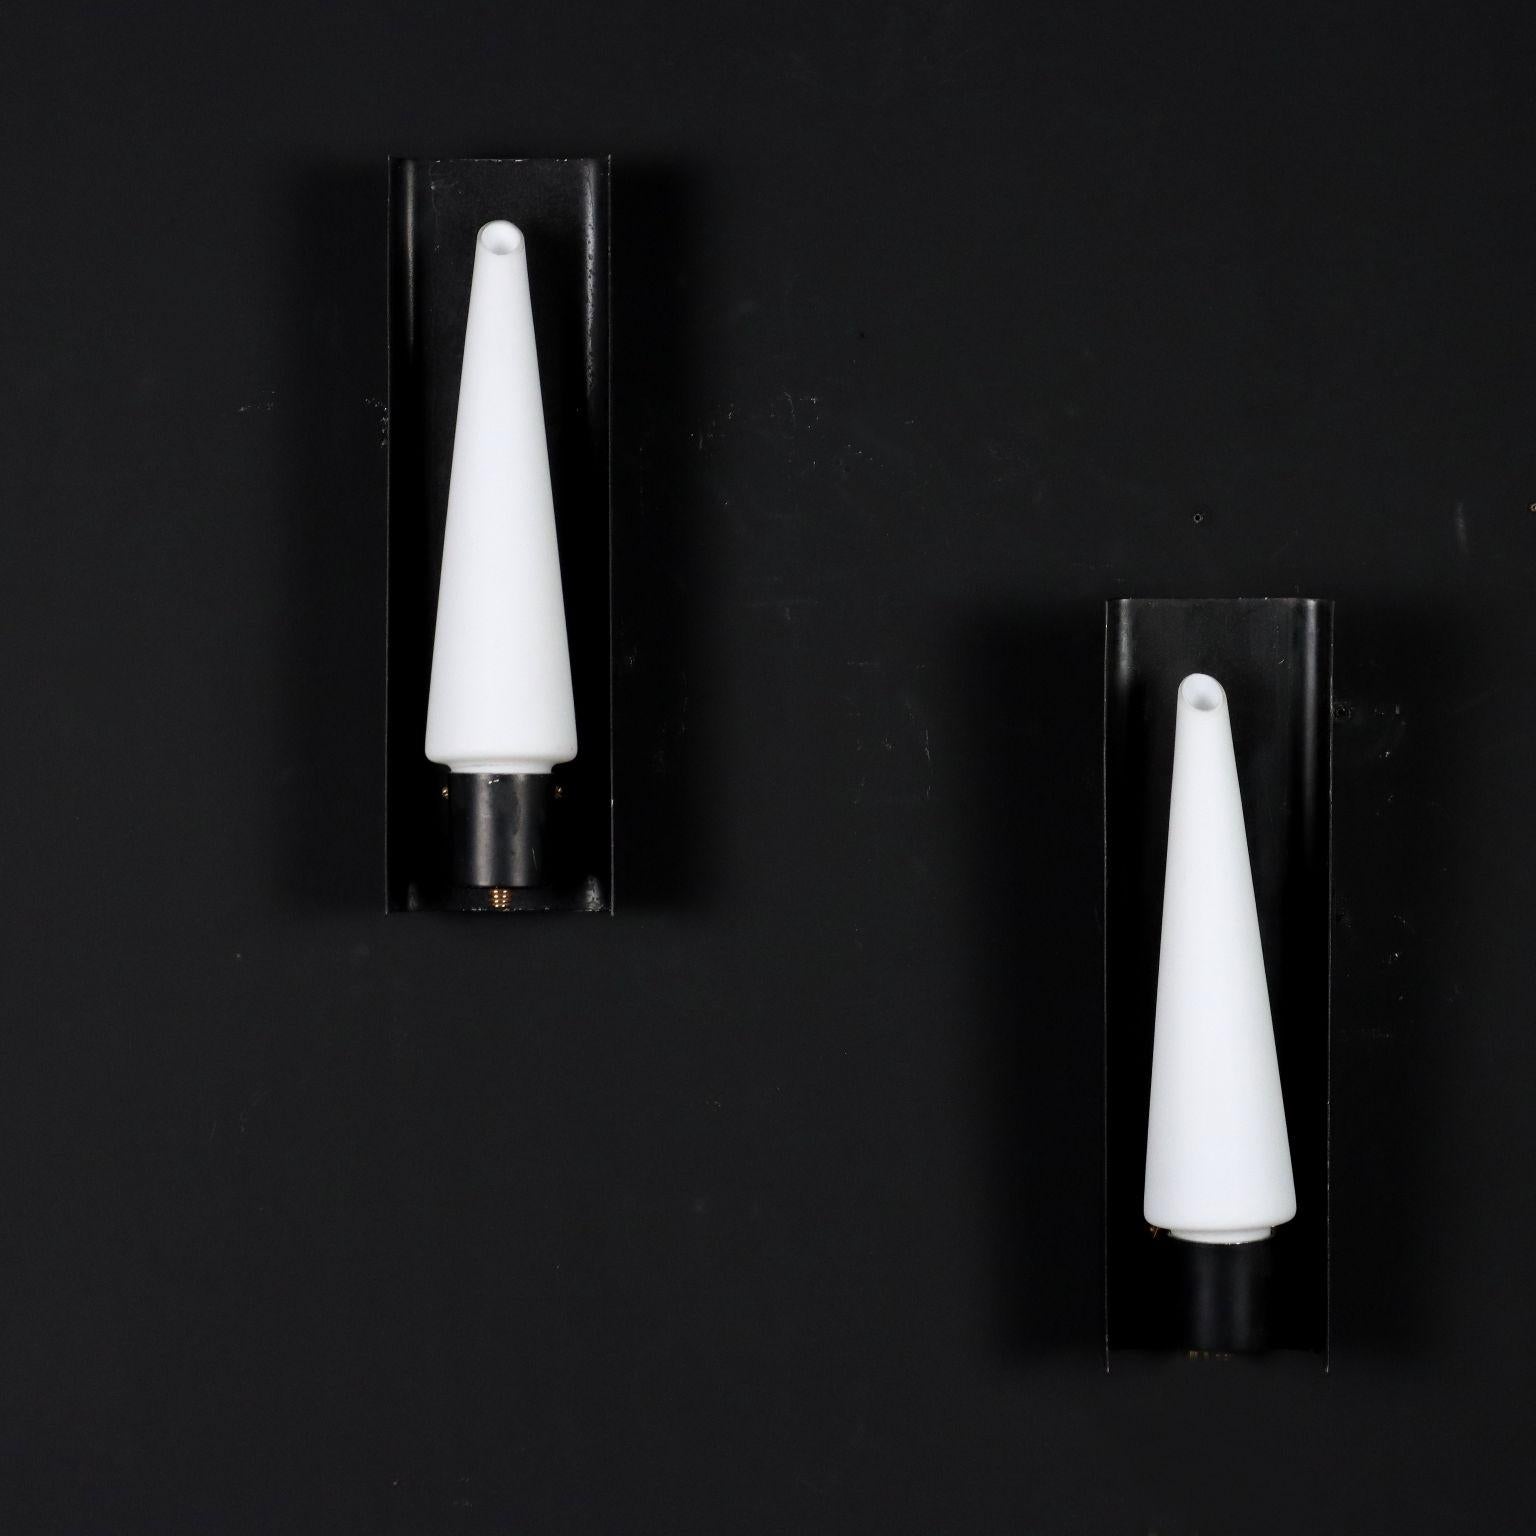 Pair of wall lamps in enameled metal with opaline glass diffuser.